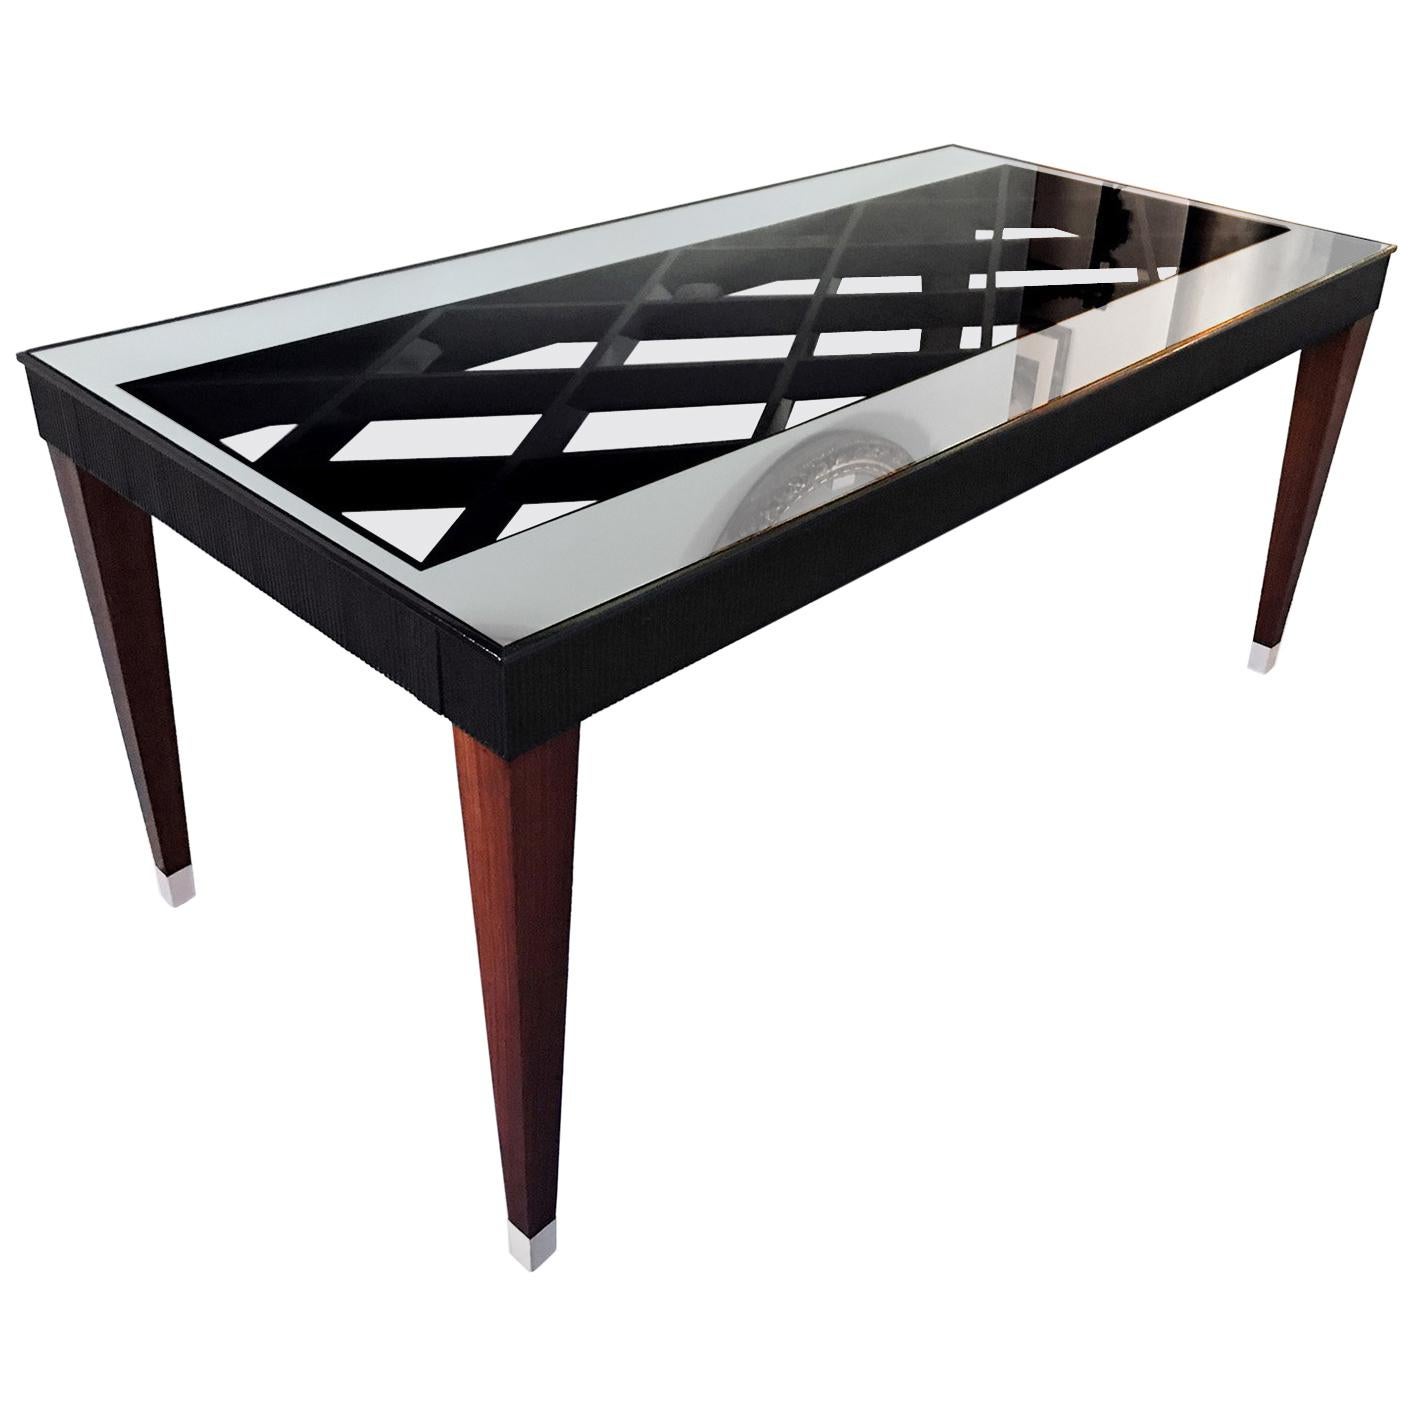 Italian Mid-Century Extensible Dining Table attributed to Paolo Buffa, 1950s For Sale